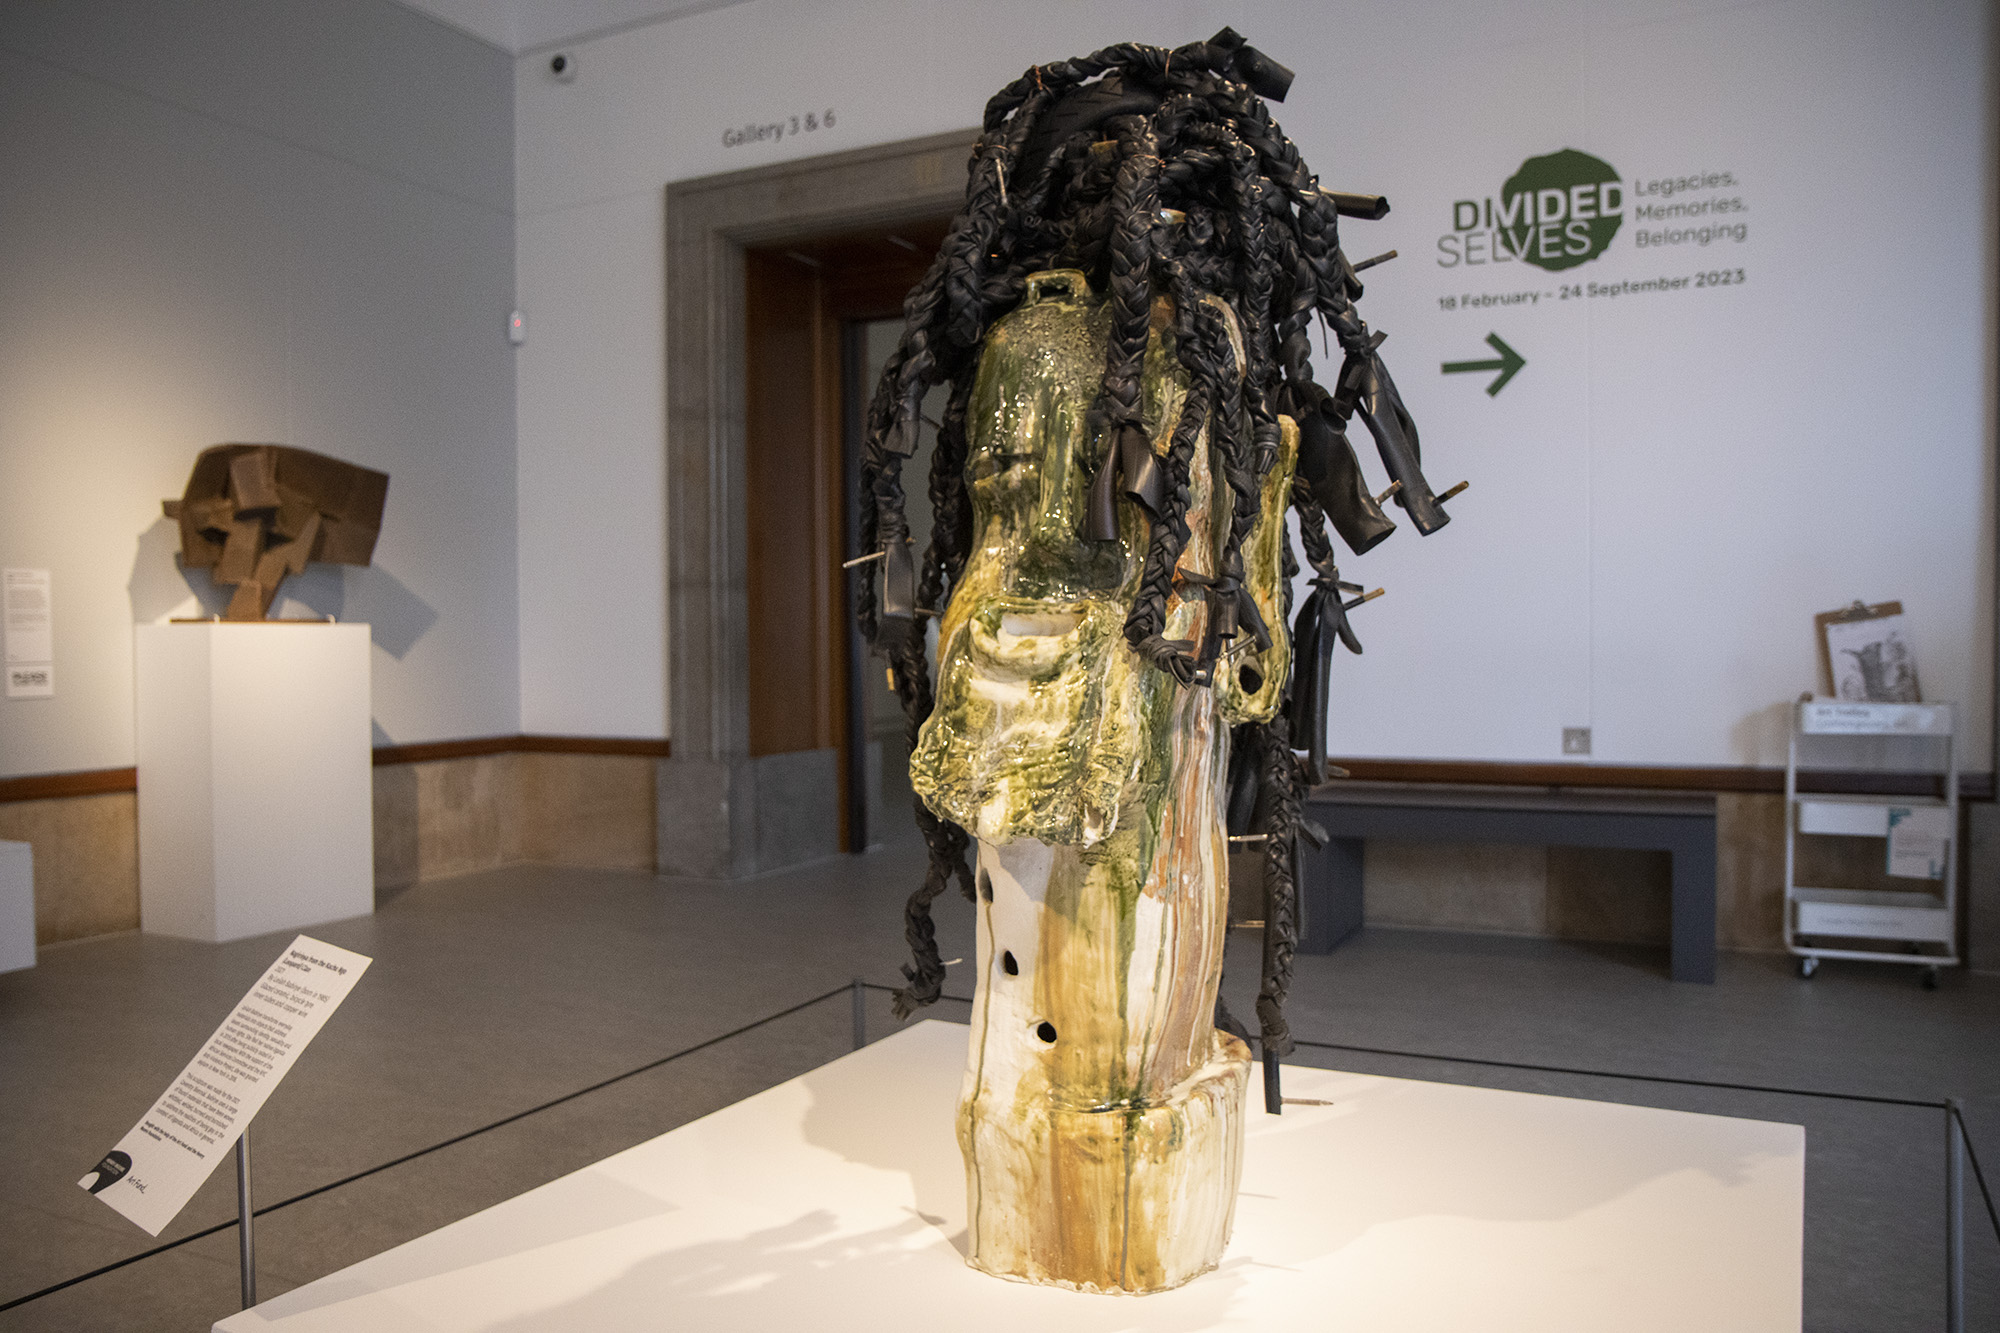 Leilah Babirye's sculpture "Nagirinya from the Kuchu Ngo (Leopard) Clan" on display at the Herbert Art Gallery & Museum. The sculpture is a large, white ceramic head painted in green and yellow tones, with braided hair made from waste rubber tubing